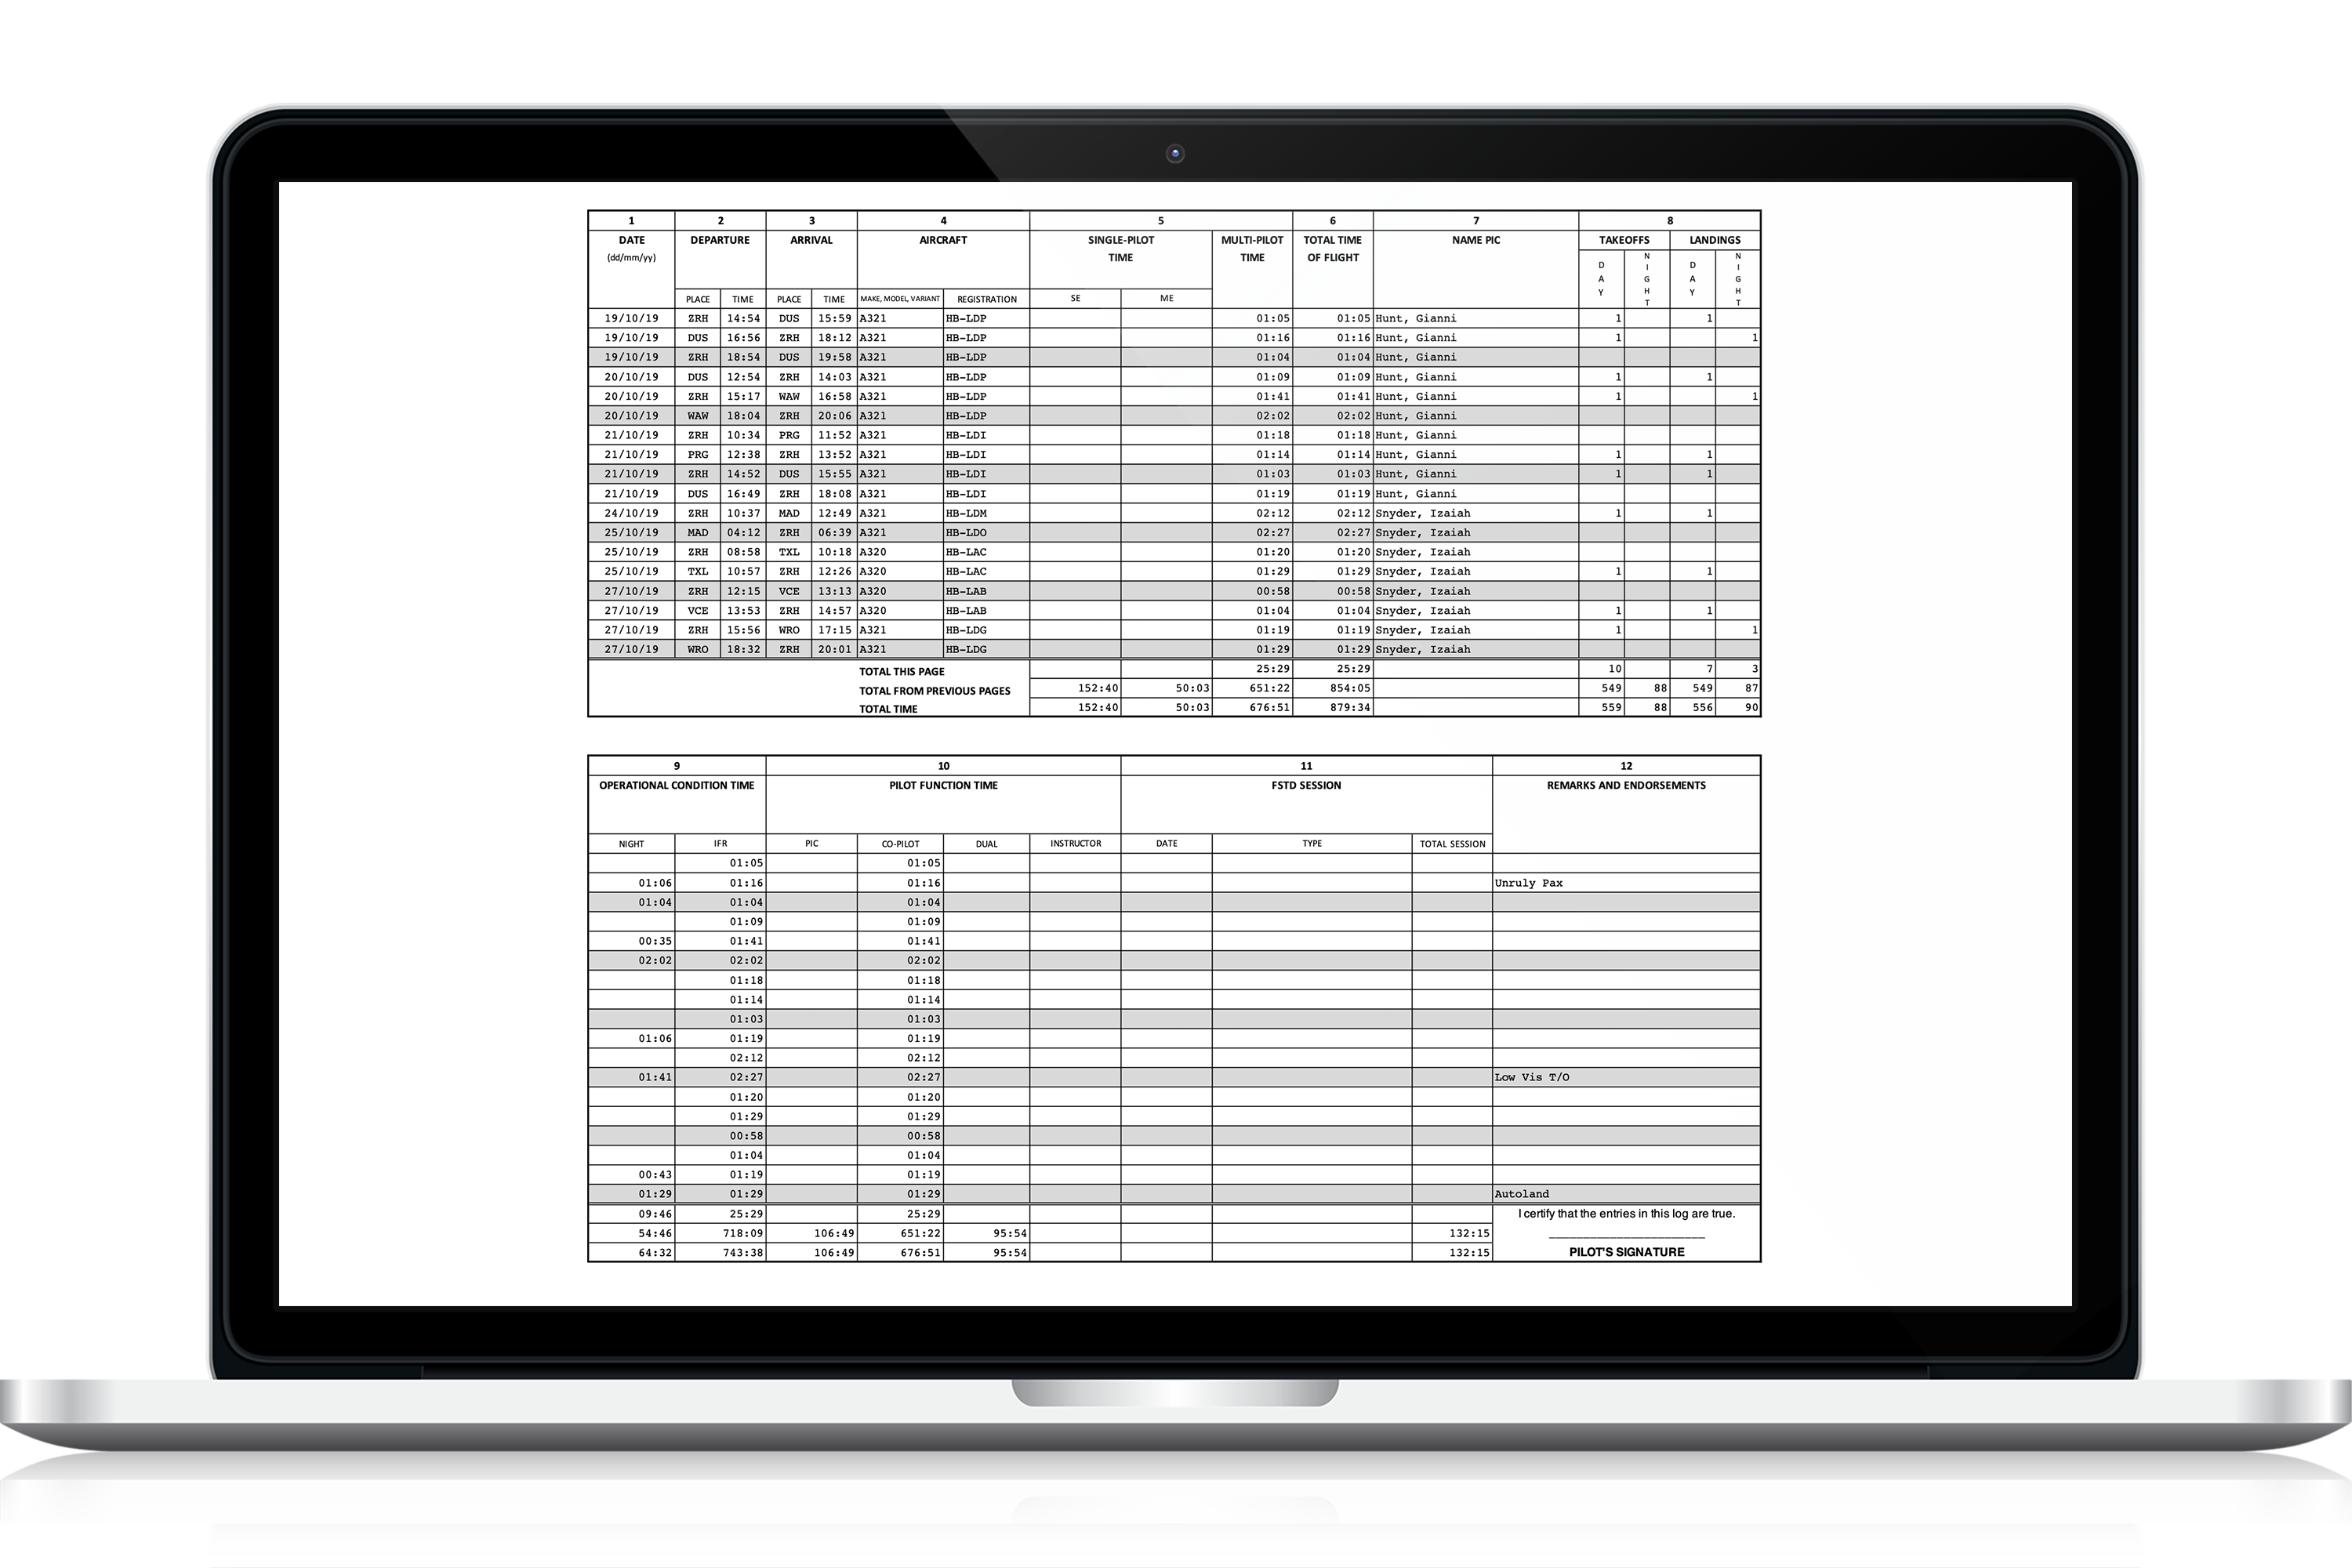 how to make a pilot logbook in excel